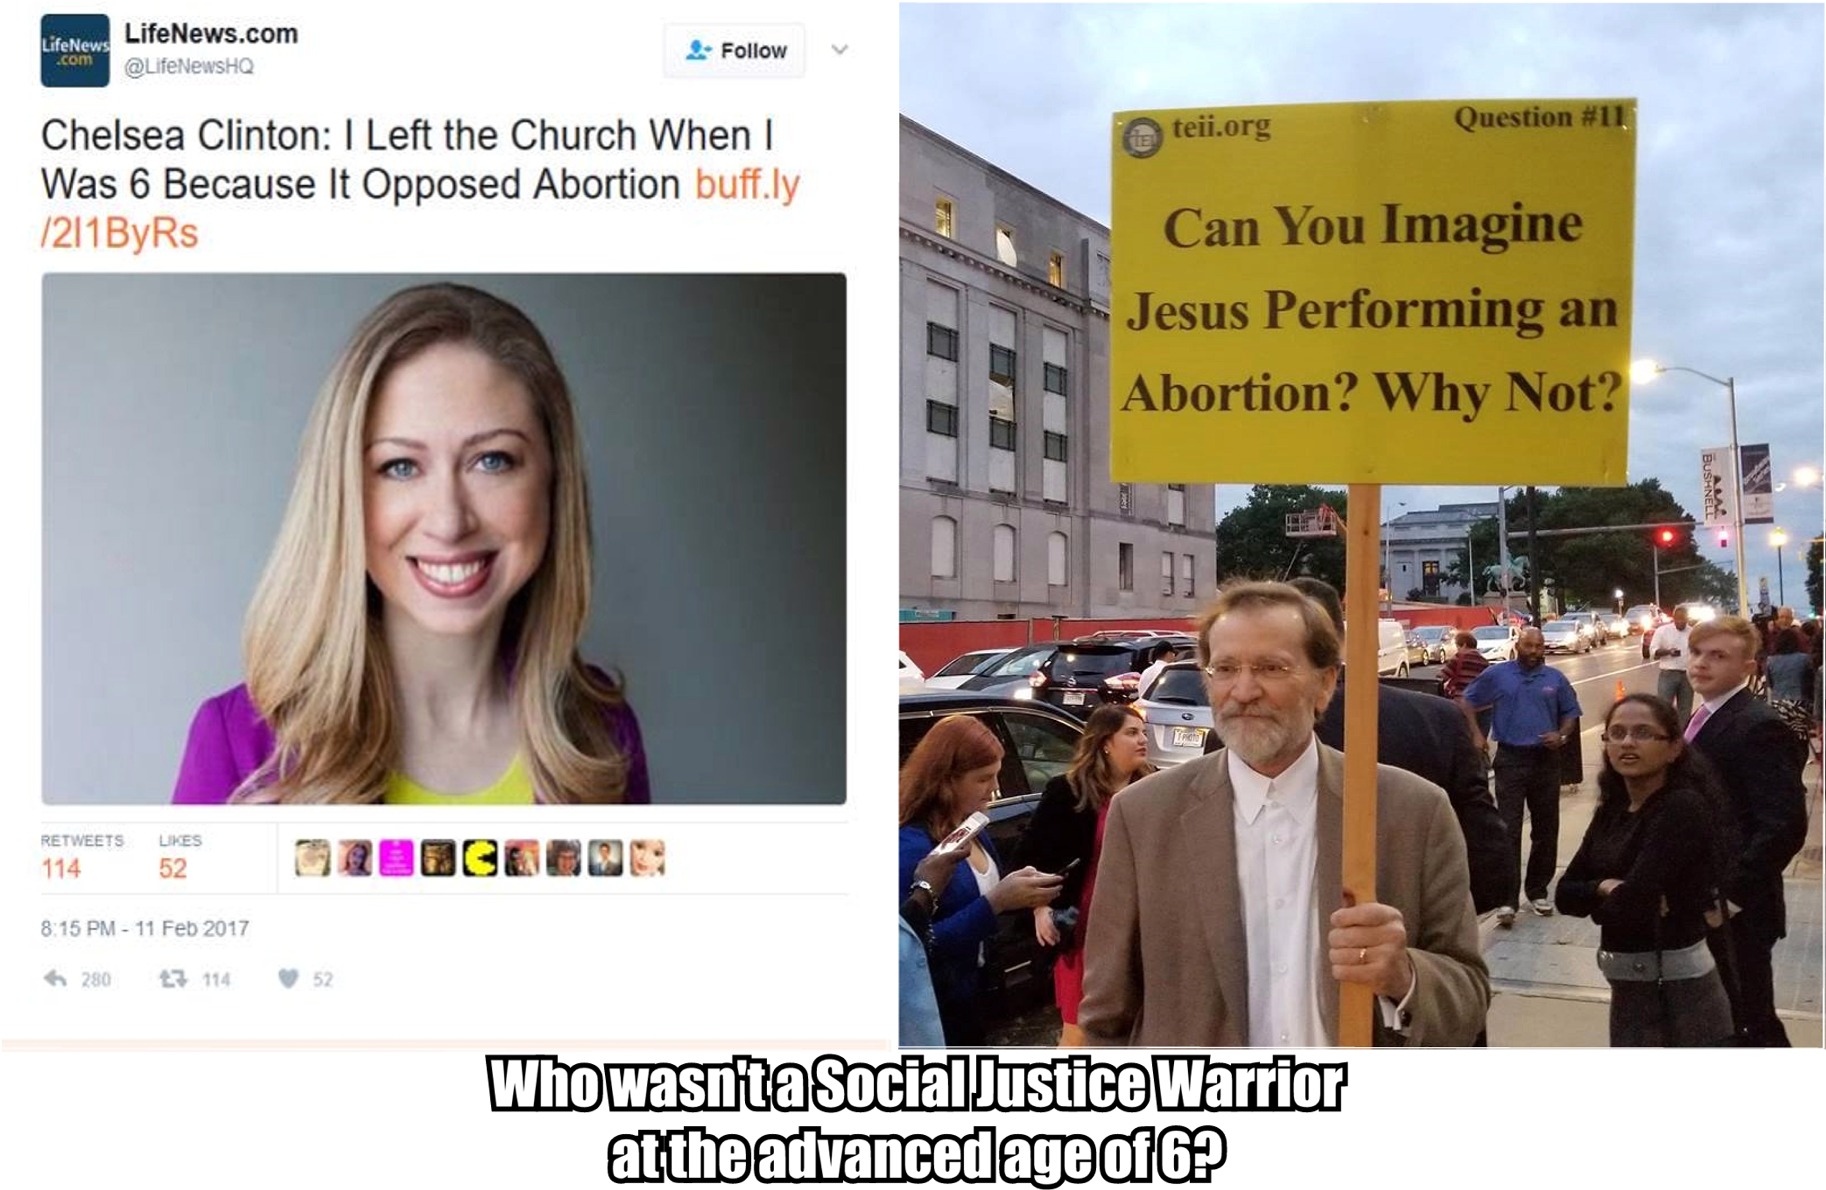 political meme presentation - LifeNews .com LifeNews.com 4. Ateii.org Question Chelsea Clinton I Left the Church When I Was 6 Because It Opposed Abortion buff.ly 1211ByRs Can You Imagine Jesus Performing an Abortion? Why Not? Bushnell 114 52 280 13 114 52